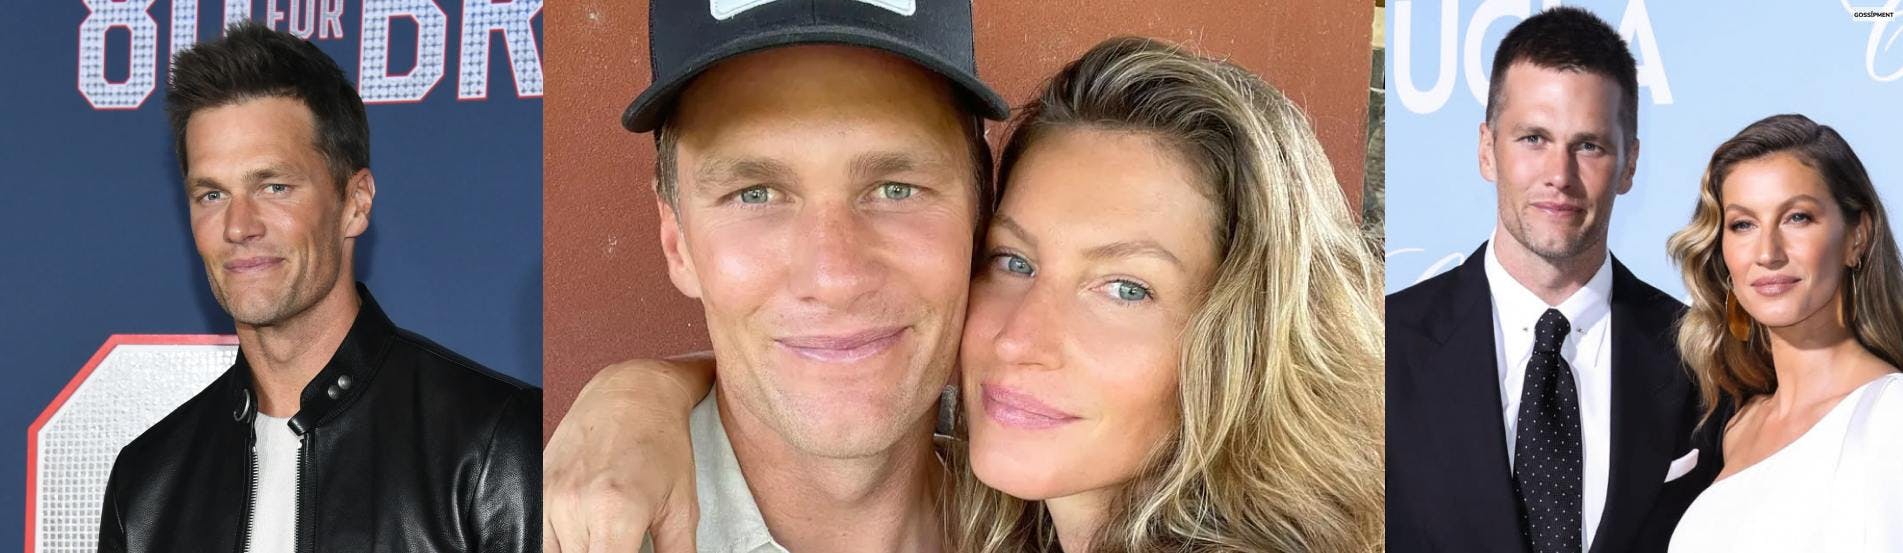 Cover Image for Tom Brady Posted A Cryptic Quote About A ‘Lying Cheating Heart’ After His Split From Gisele Bündchen